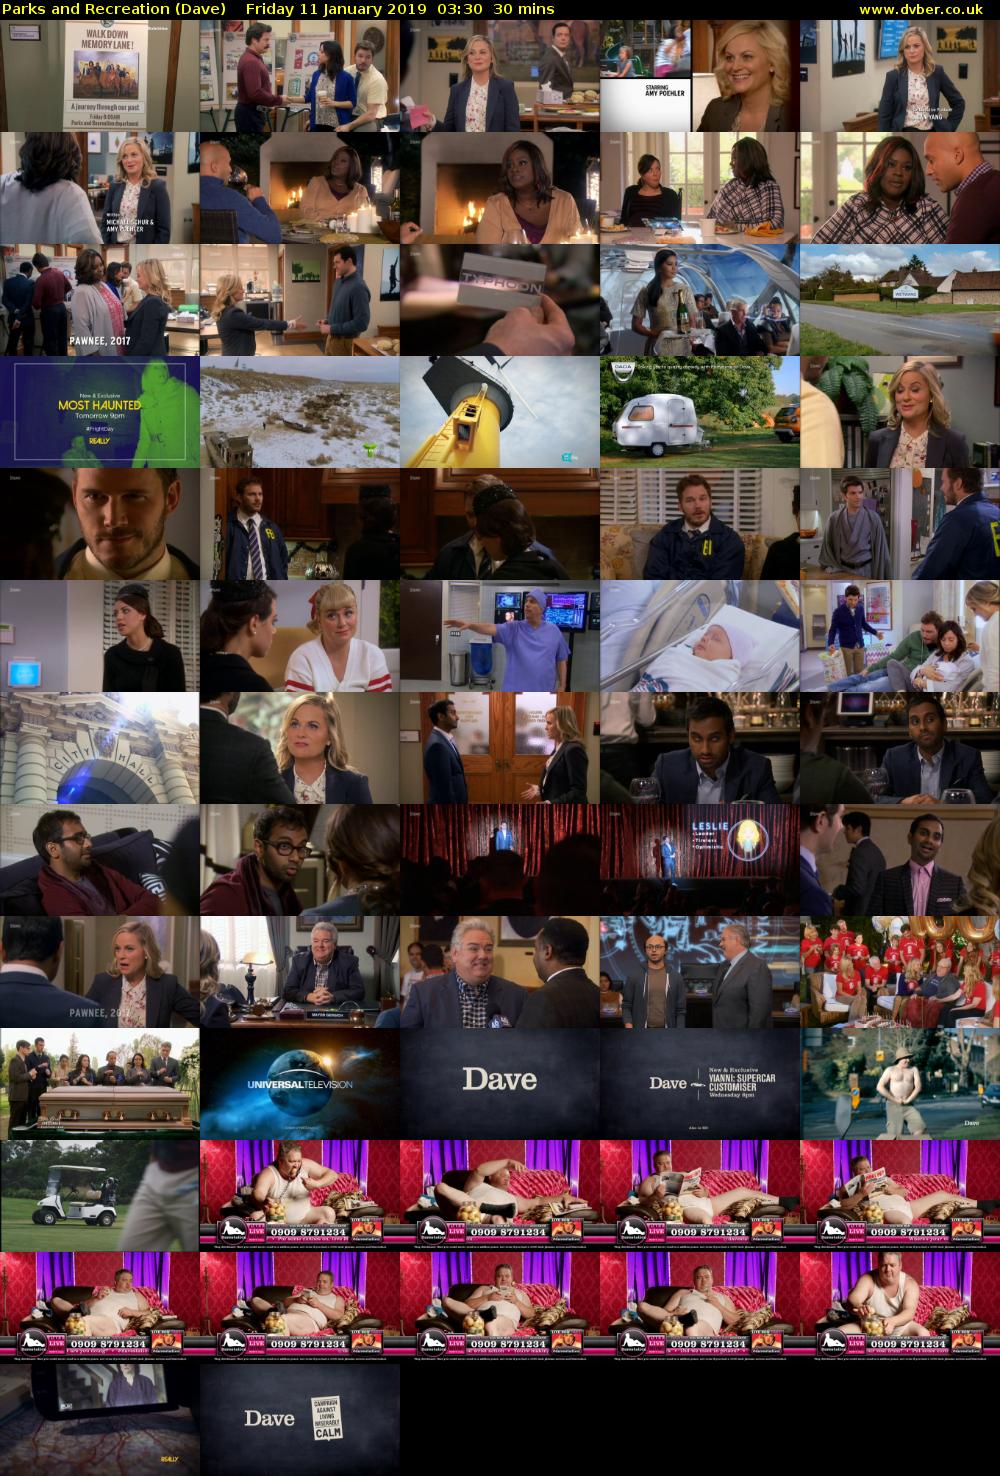 Parks and Recreation (Dave) Friday 11 January 2019 03:30 - 04:00